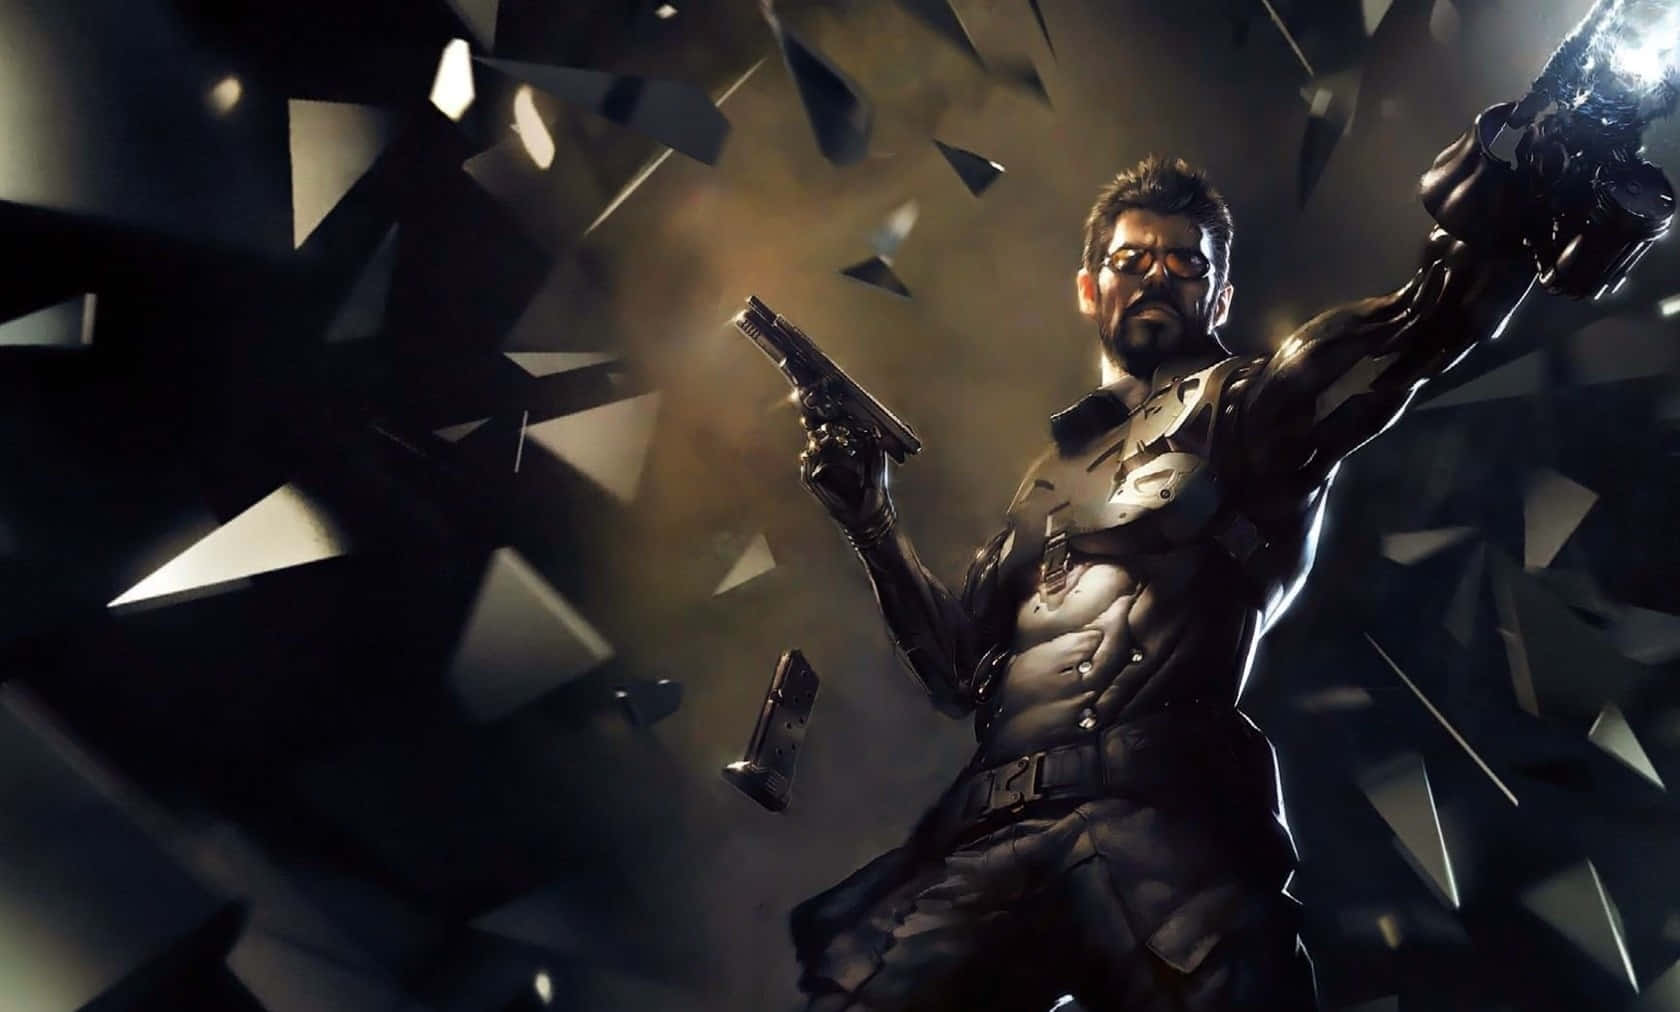 Guards stand watch in Deus Ex: Mankind Divided Wallpaper